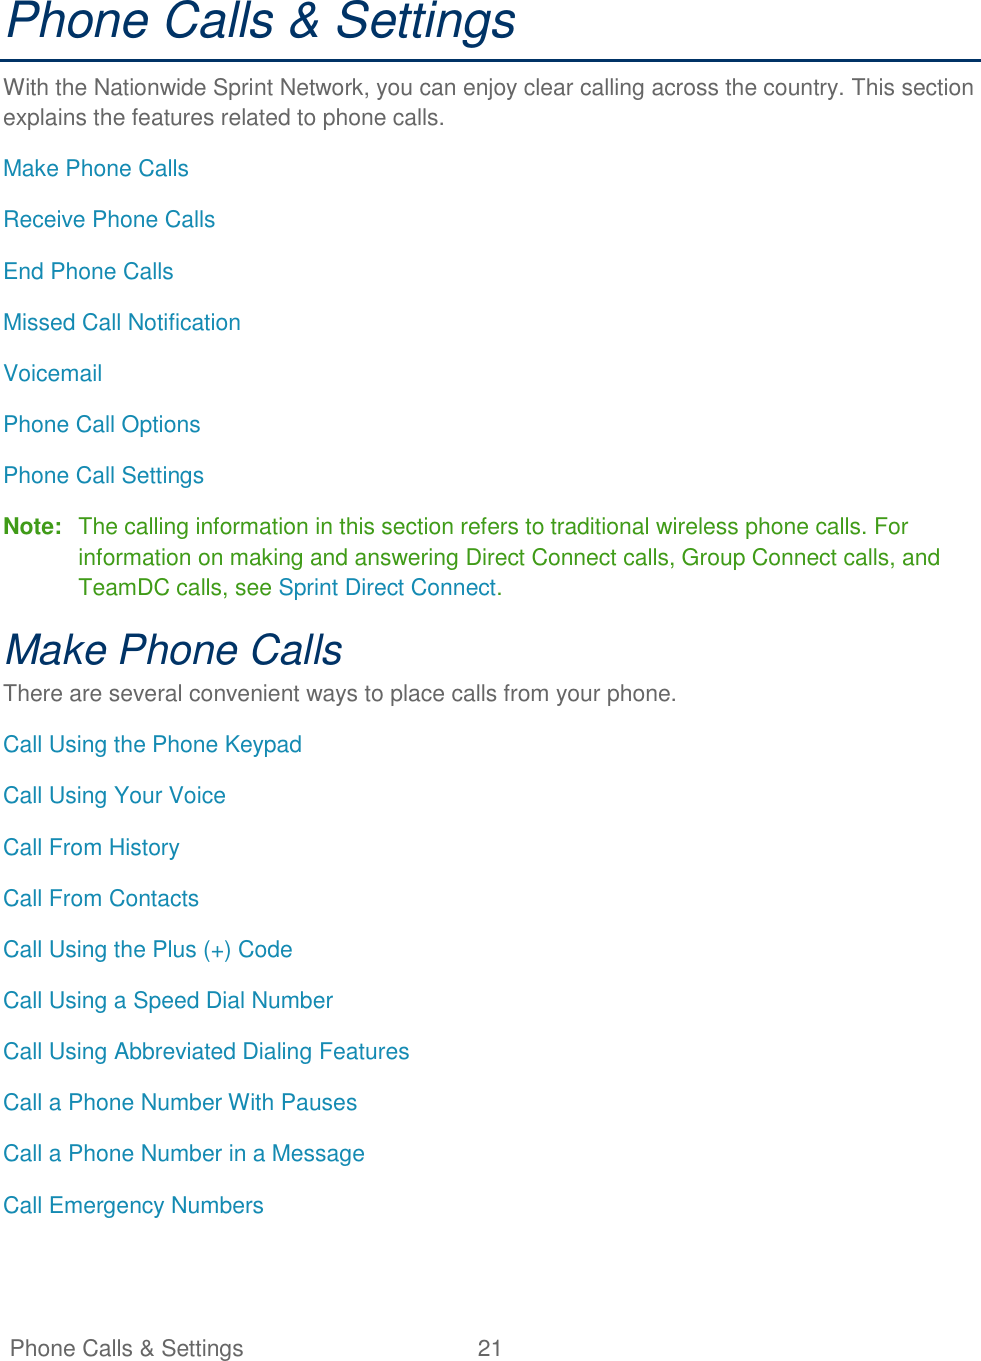   Phone Calls &amp; Settings  21   Phone Calls &amp; Settings With the Nationwide Sprint Network, you can enjoy clear calling across the country. This section explains the features related to phone calls. Make Phone Calls Receive Phone Calls End Phone Calls Missed Call Notification Voicemail Phone Call Options Phone Call Settings Note:  The calling information in this section refers to traditional wireless phone calls. For information on making and answering Direct Connect calls, Group Connect calls, and TeamDC calls, see Sprint Direct Connect. Make Phone Calls There are several convenient ways to place calls from your phone. Call Using the Phone Keypad Call Using Your Voice Call From History Call From Contacts Call Using the Plus (+) Code Call Using a Speed Dial Number Call Using Abbreviated Dialing Features Call a Phone Number With Pauses Call a Phone Number in a Message Call Emergency Numbers  